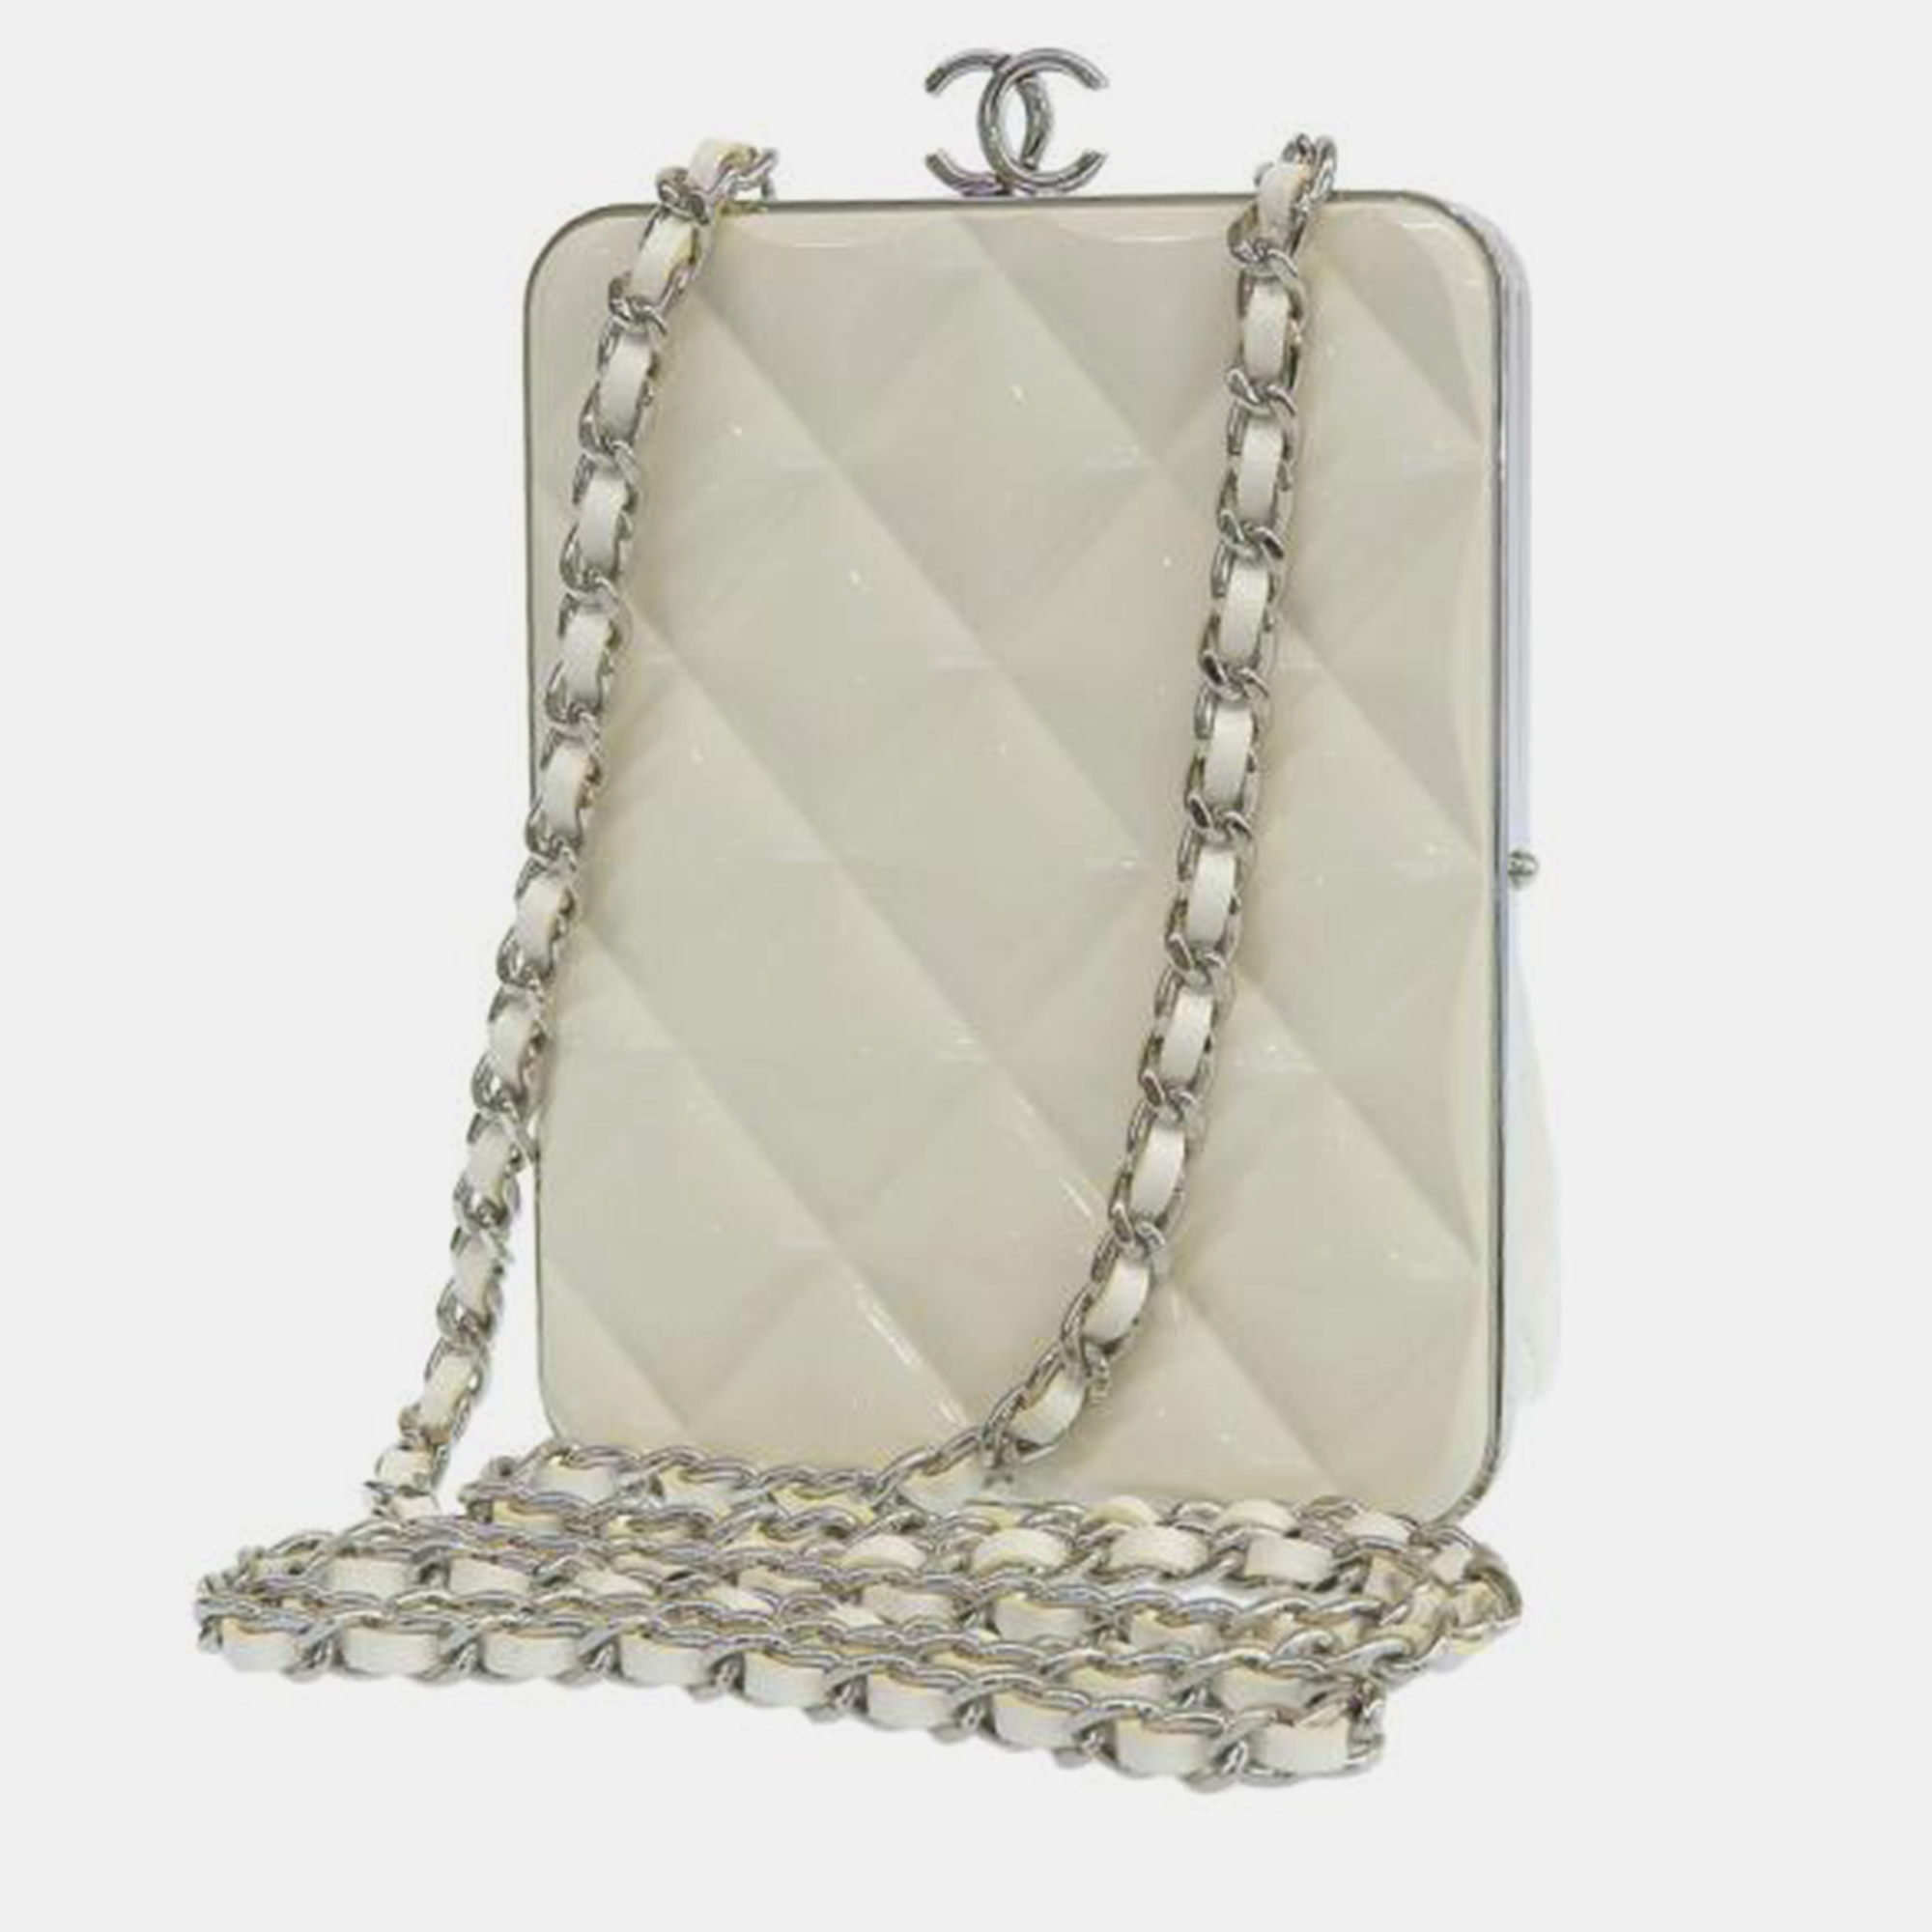 Elevate your style with an exquisite Chanel clutch. This timeless masterpiece is crafted from high grade materials adorned with the iconic Dior motifs and features meticulous craftsmanship for luxury and sophistication.